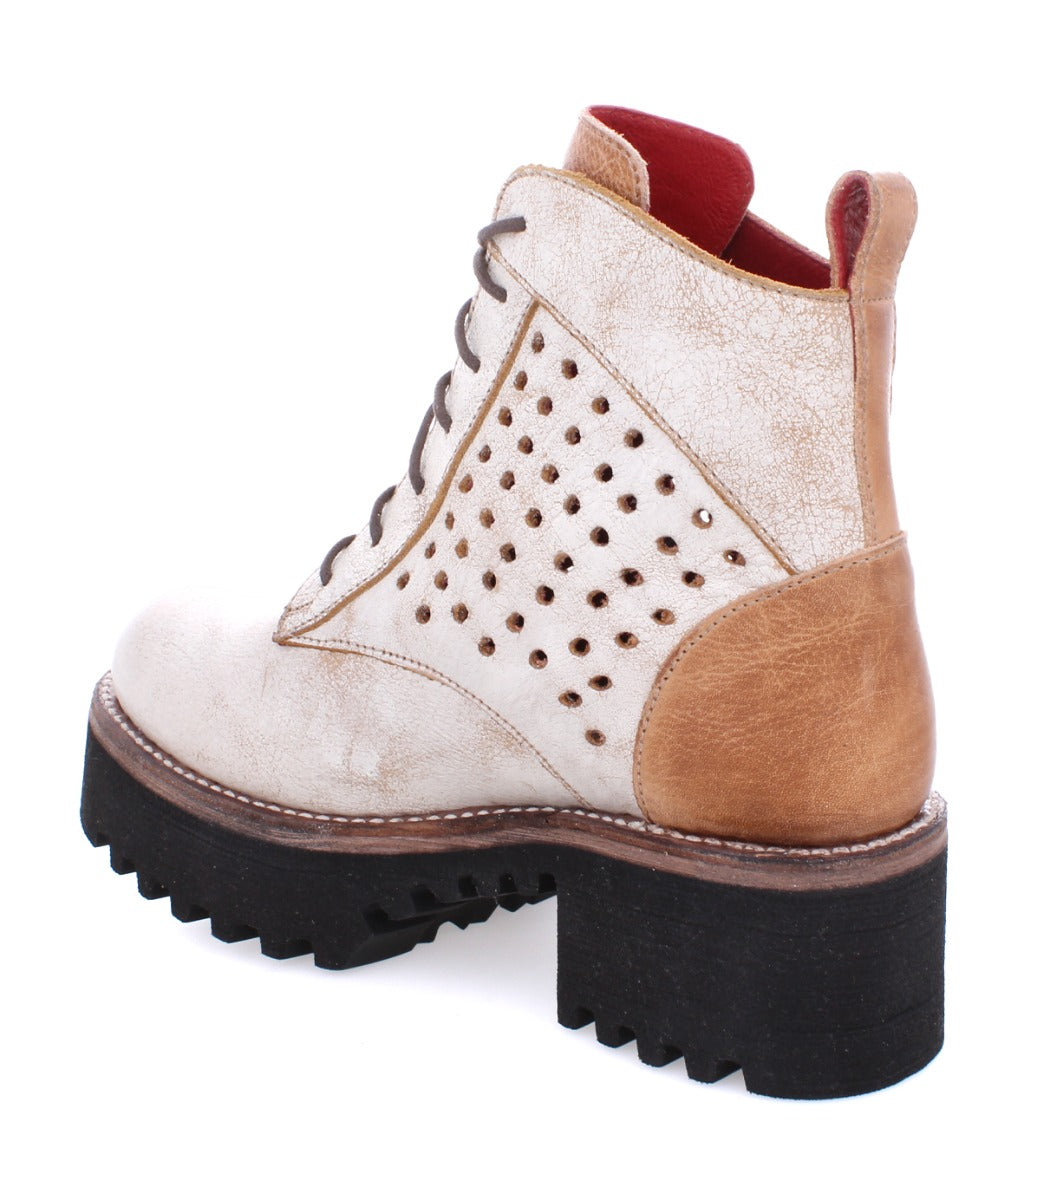 A women's ankle boot with perforations and a black sole called the Tanzania by Bed Stu.